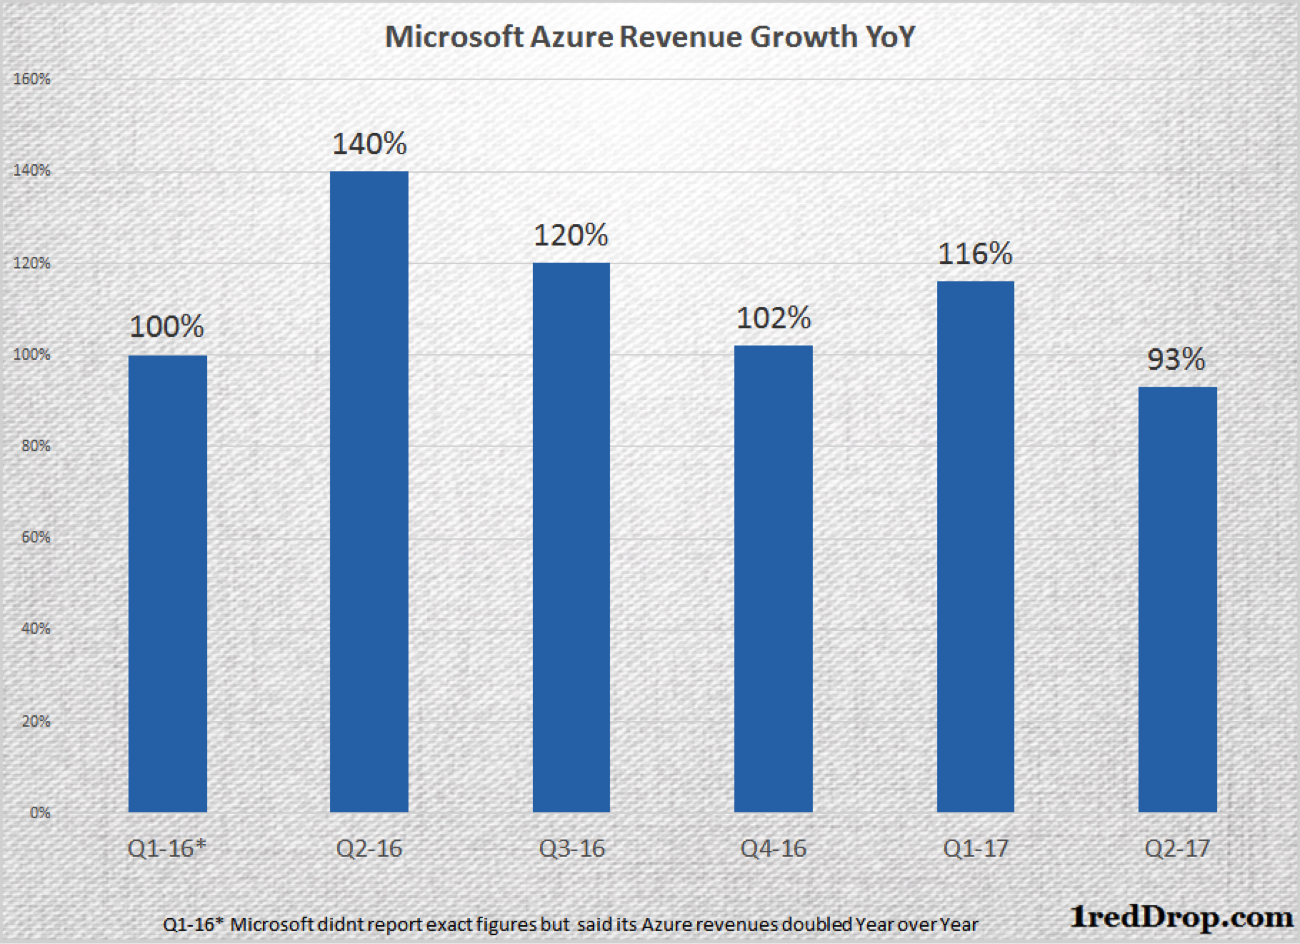 Microsoft Azure growth year over year